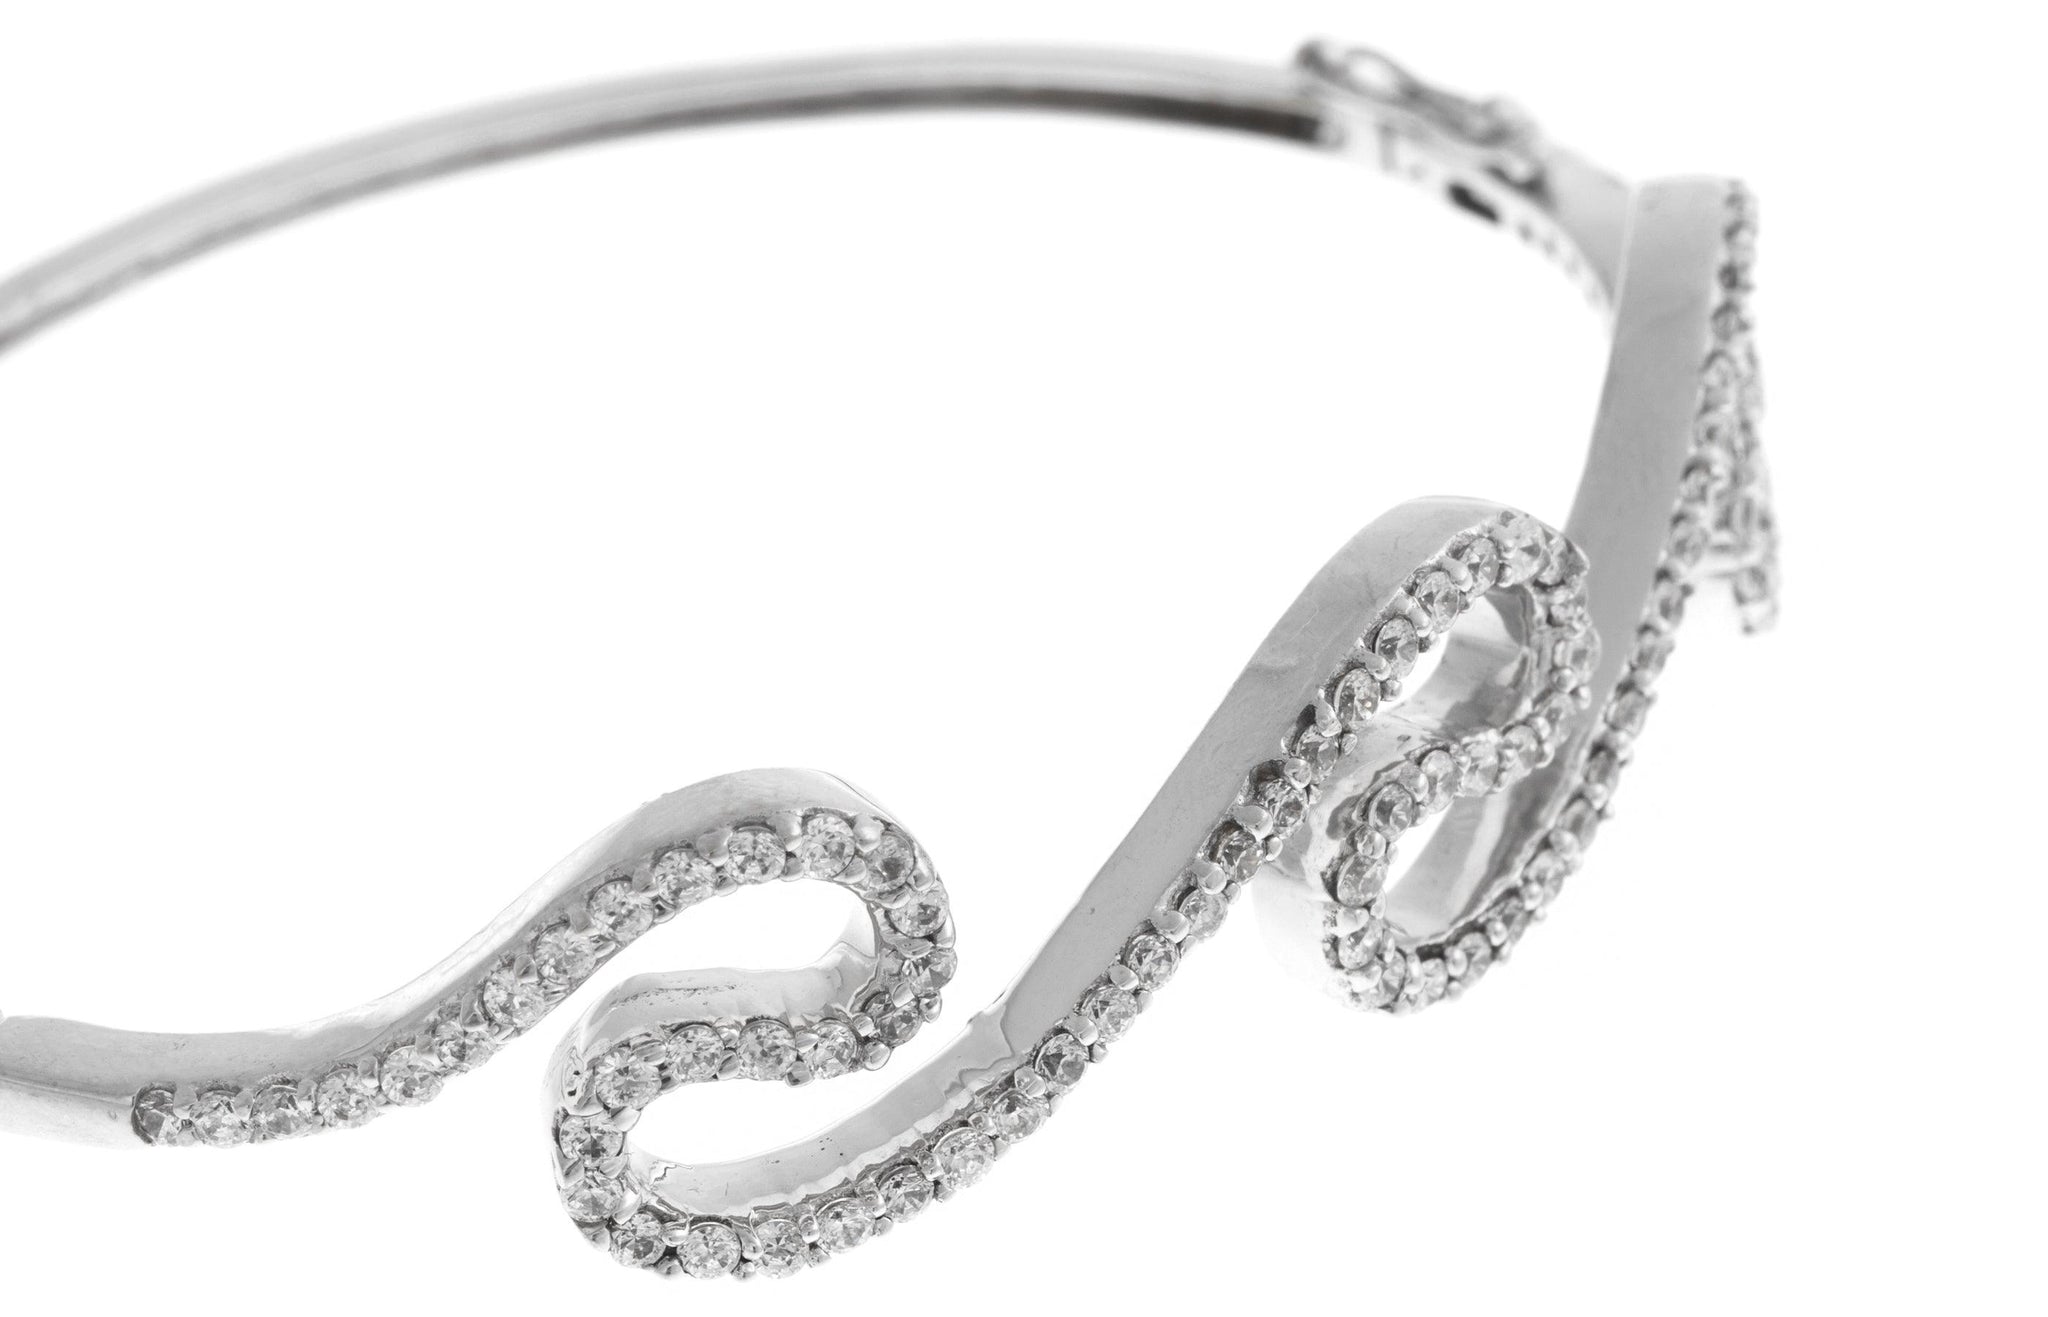 18ct White Gold Bangle with Cubic Zirconia Stones (16.7g) (B-1457)